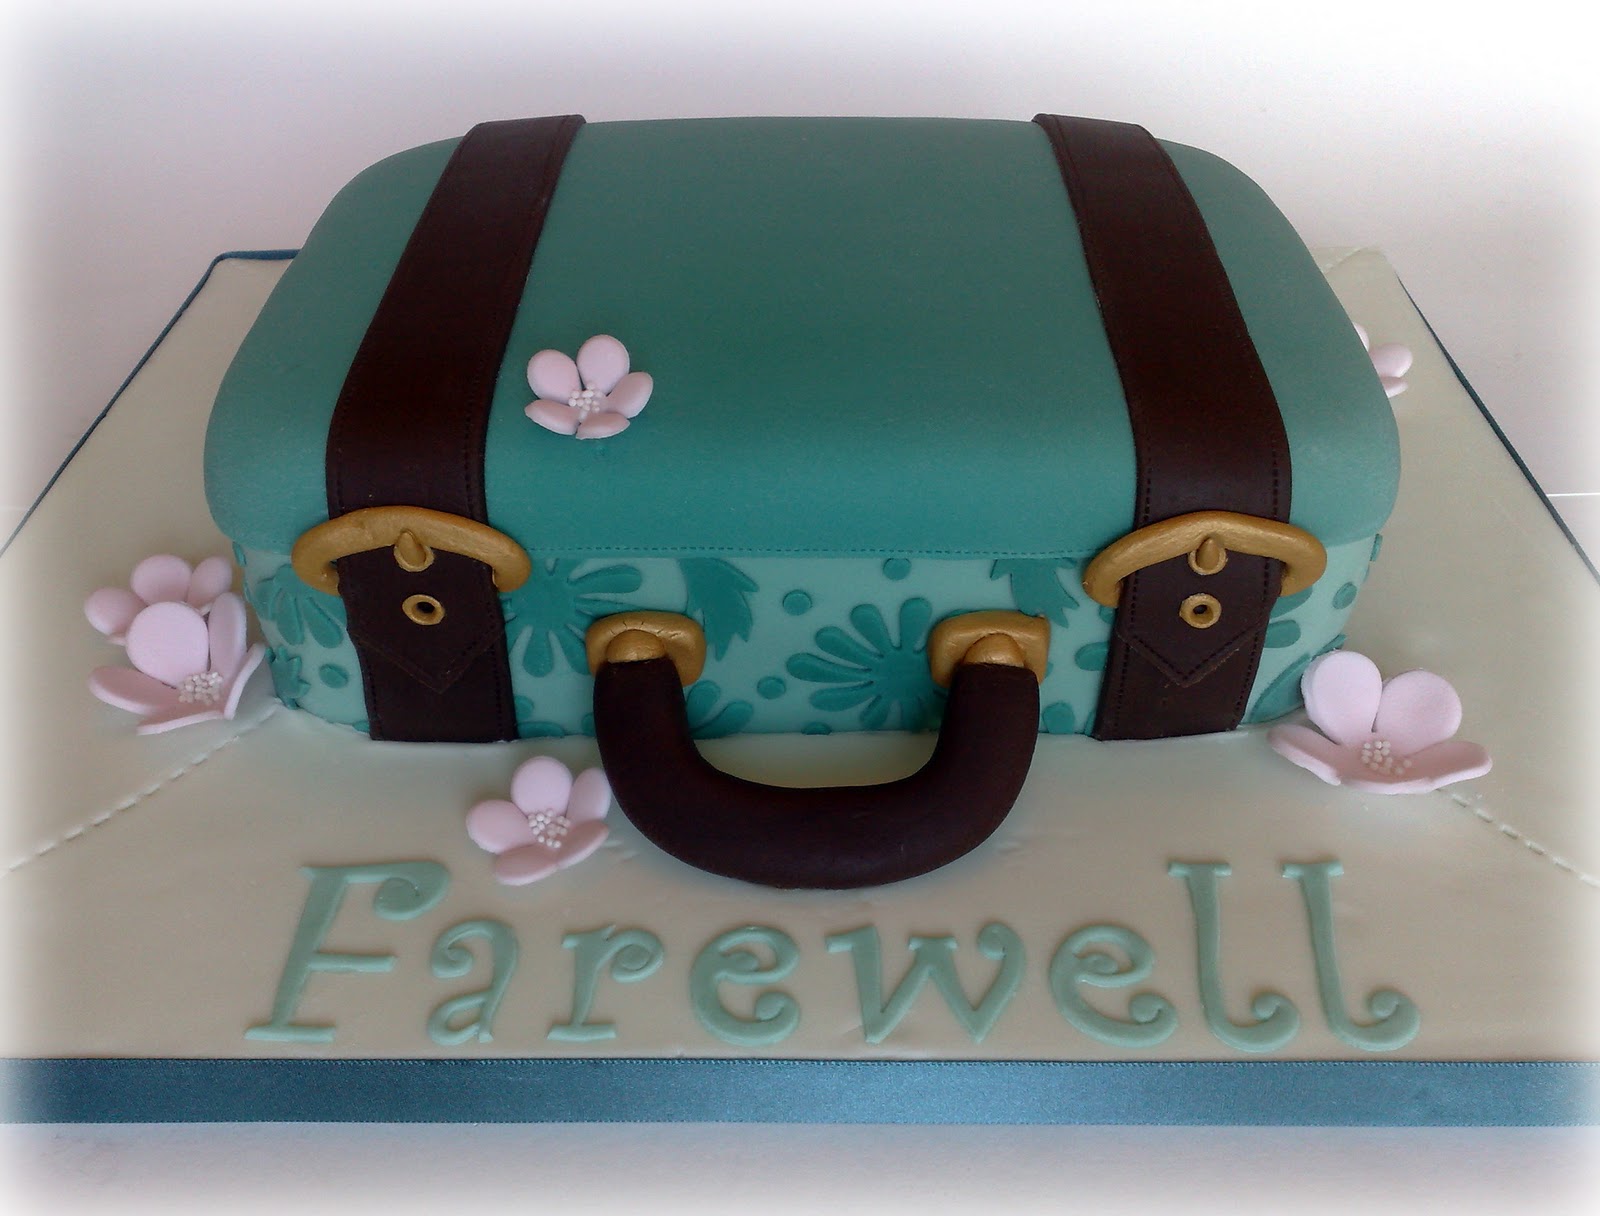 Small Things Iced: Farewell Suitcase Cake